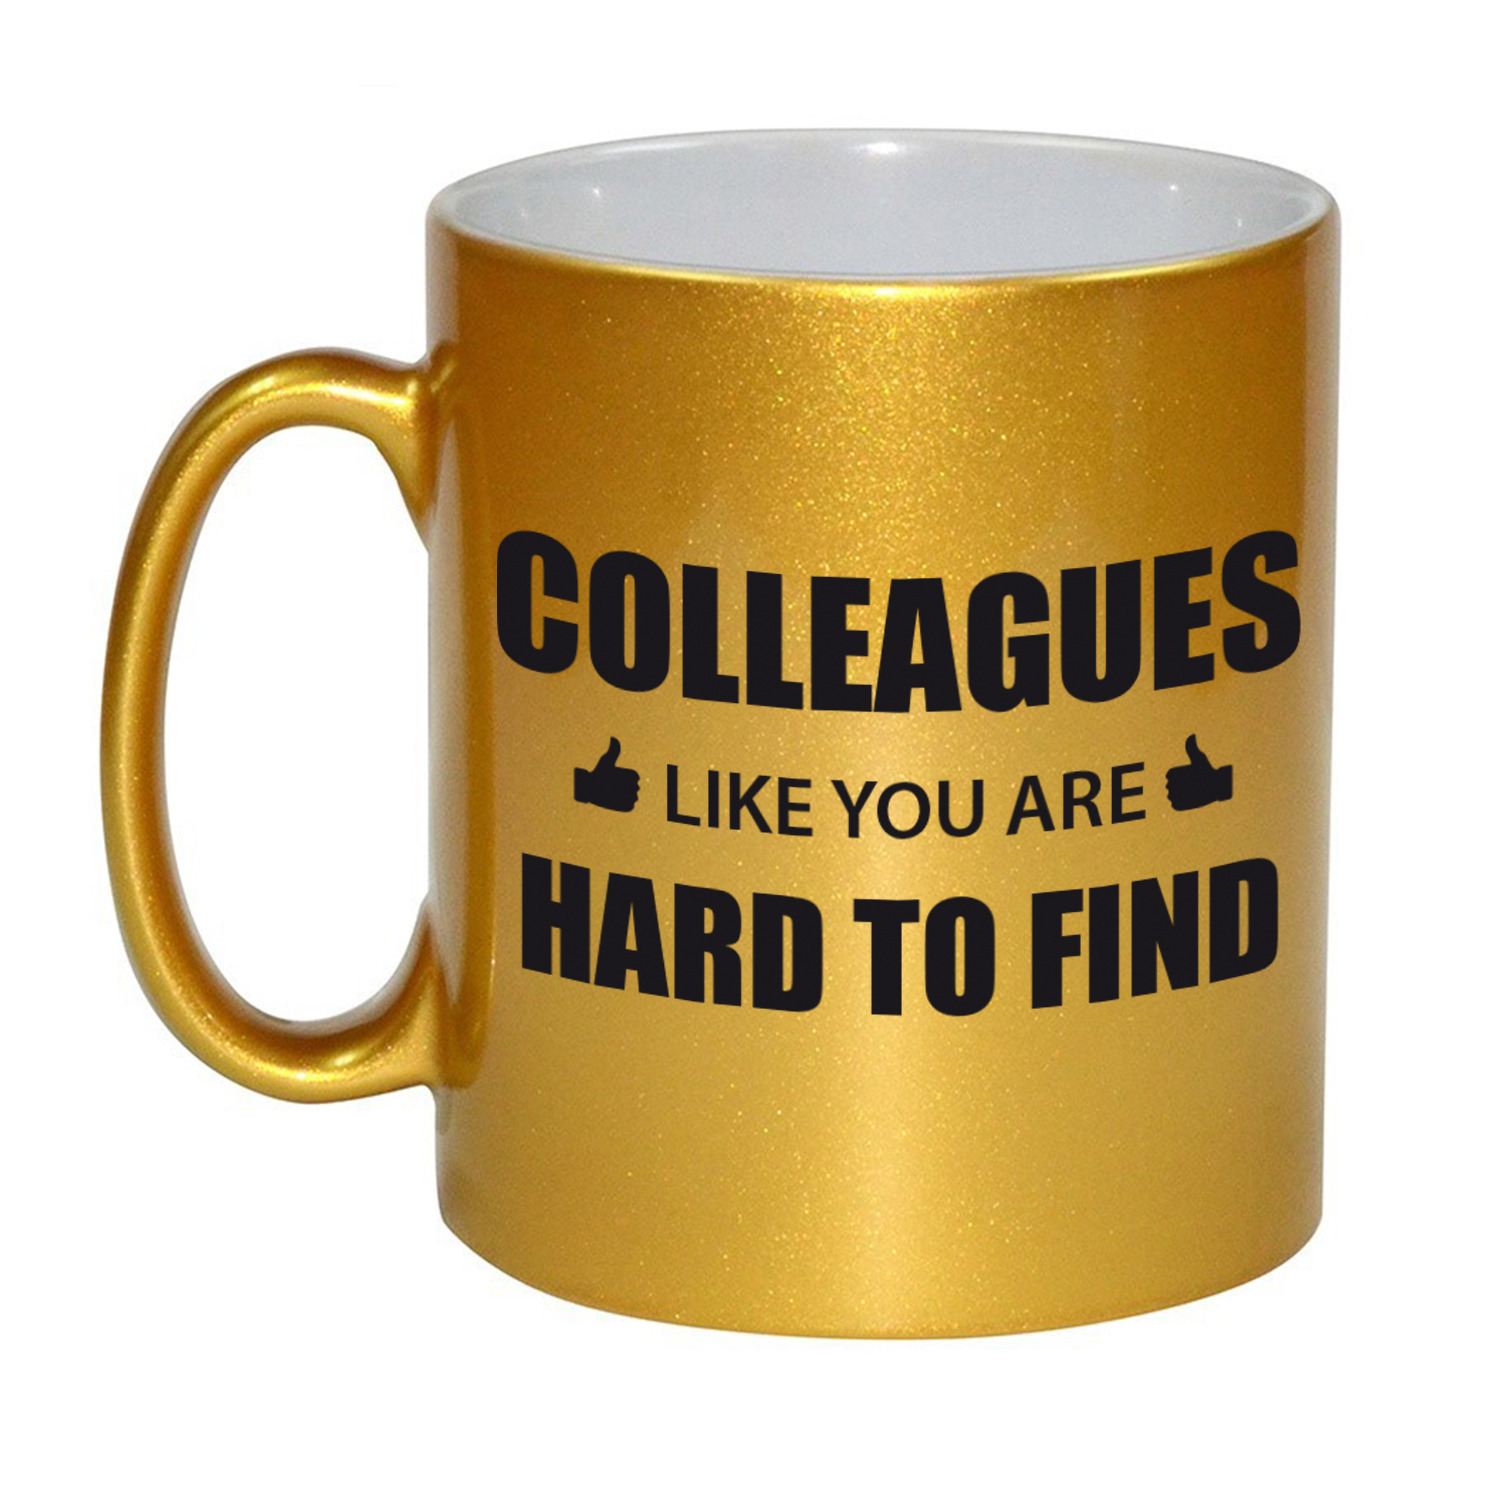 Cadeau gouden mok-beker Colleagues like you are hard to find voor personeel-collega